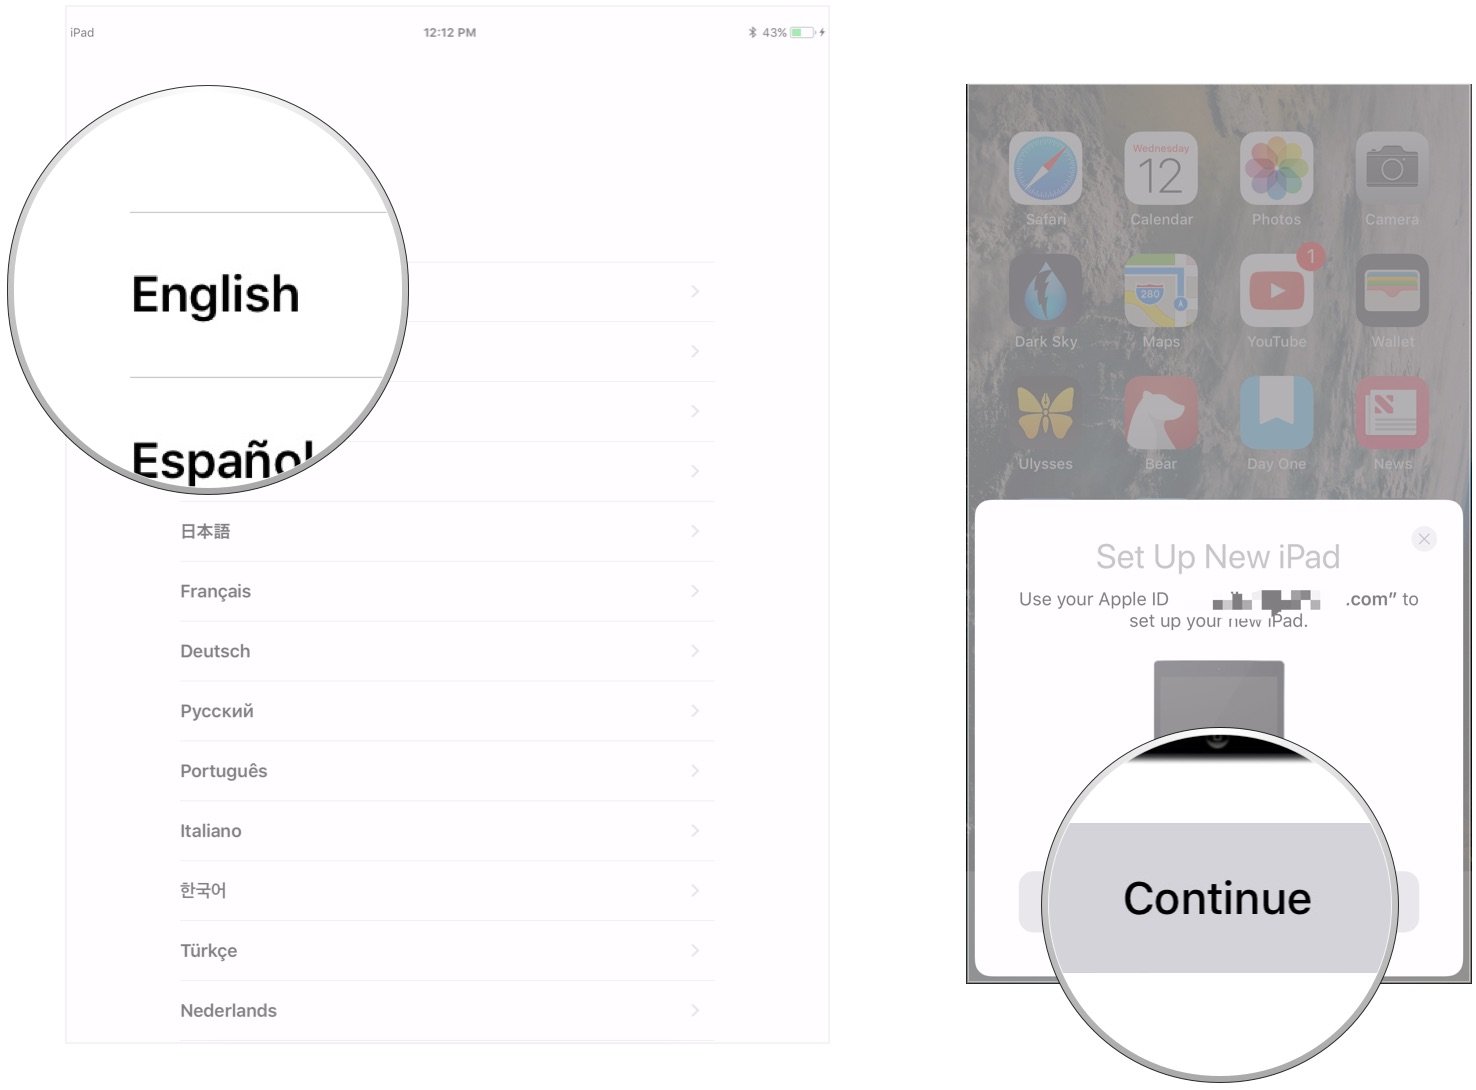 Use Automatic Setup to transfer data to new iPad by showing steps: Choose language, tap Continue